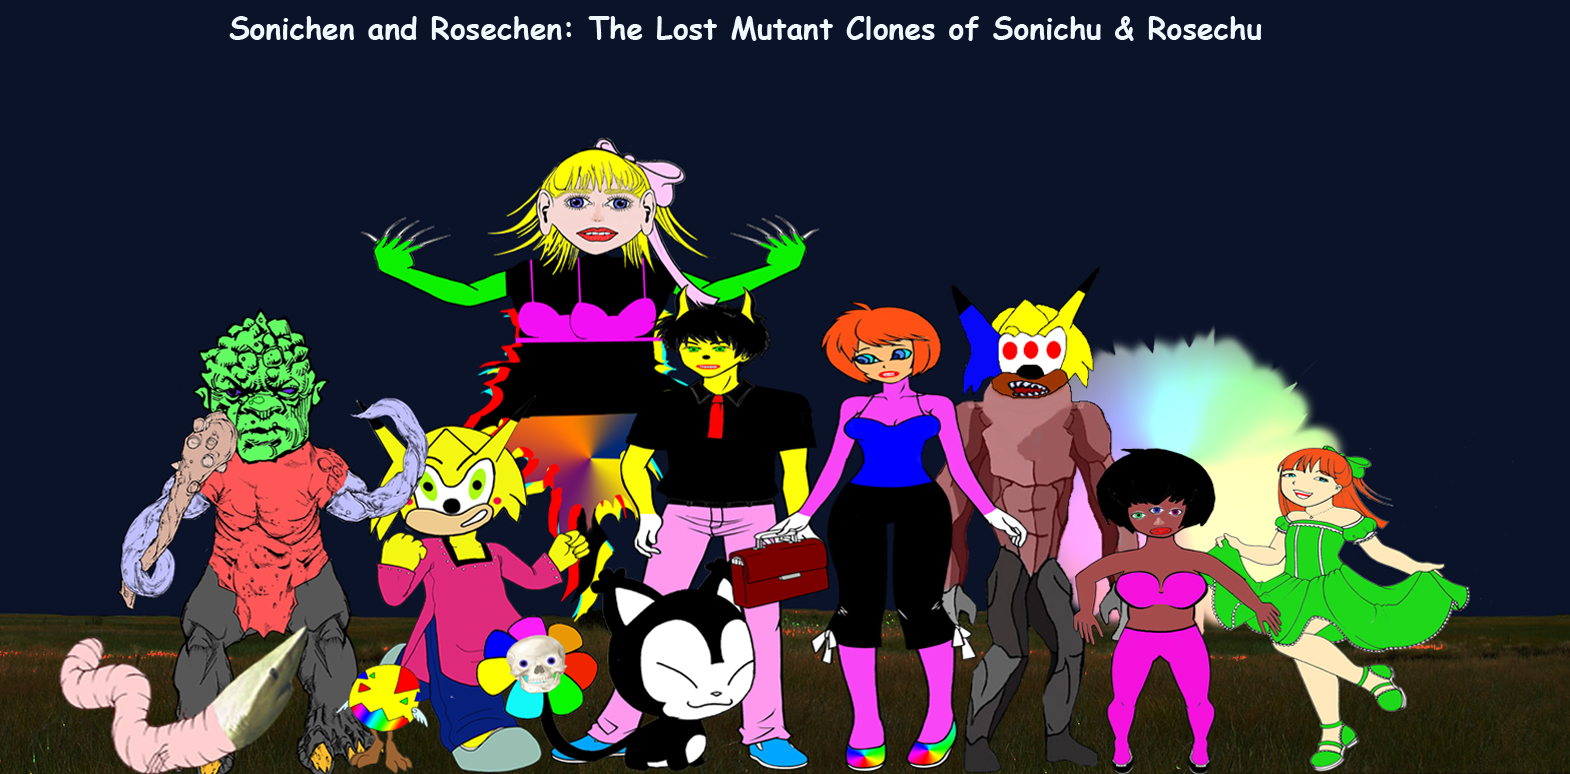 Sonichen and Rosechen Characters for letter (20).jpg